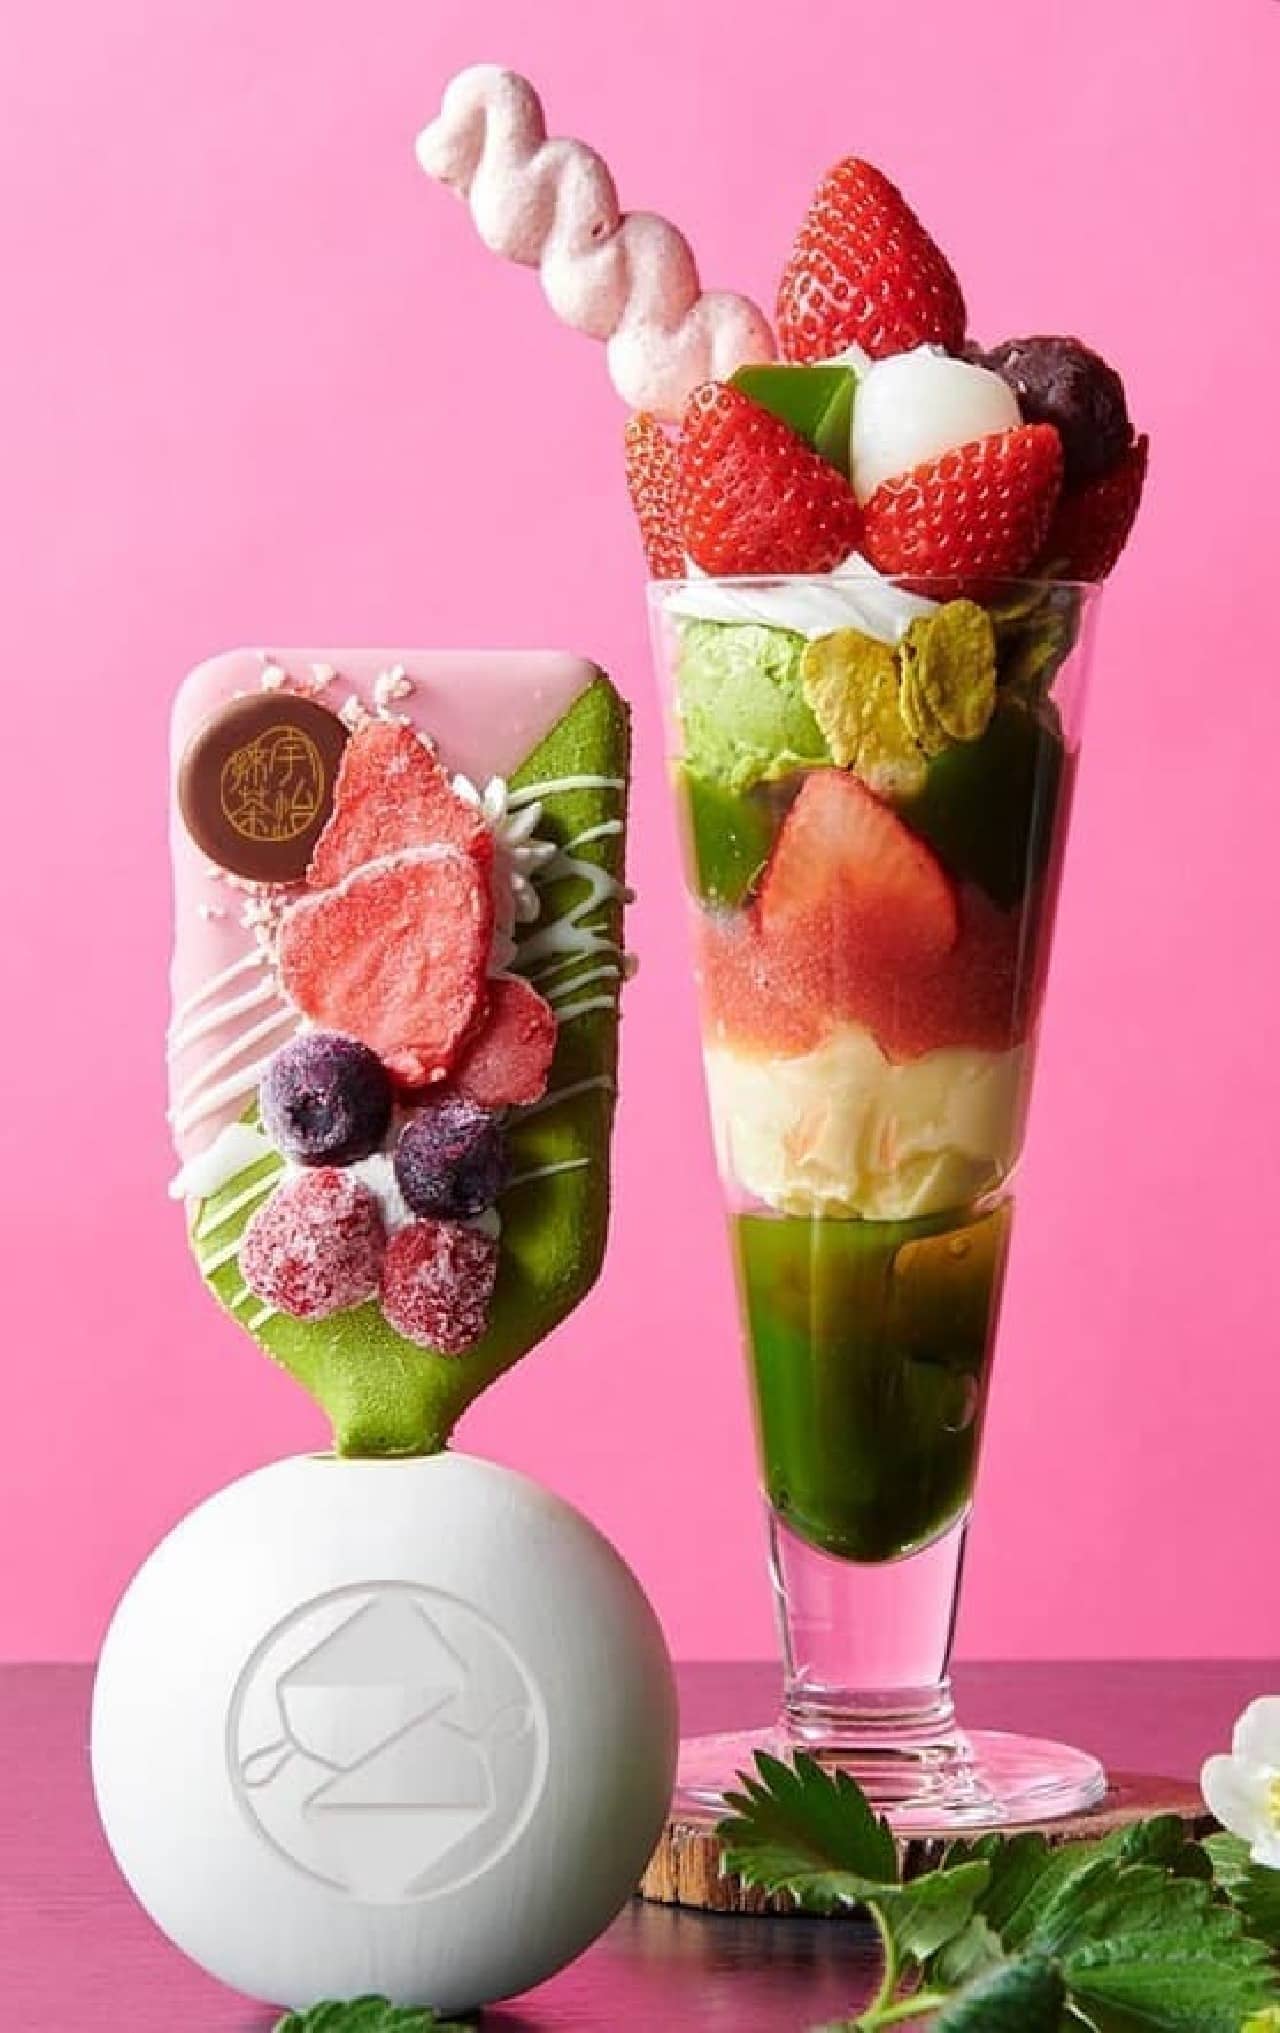 "Ito Kyuemon's Matcha Parfait" is now on the ice bar!